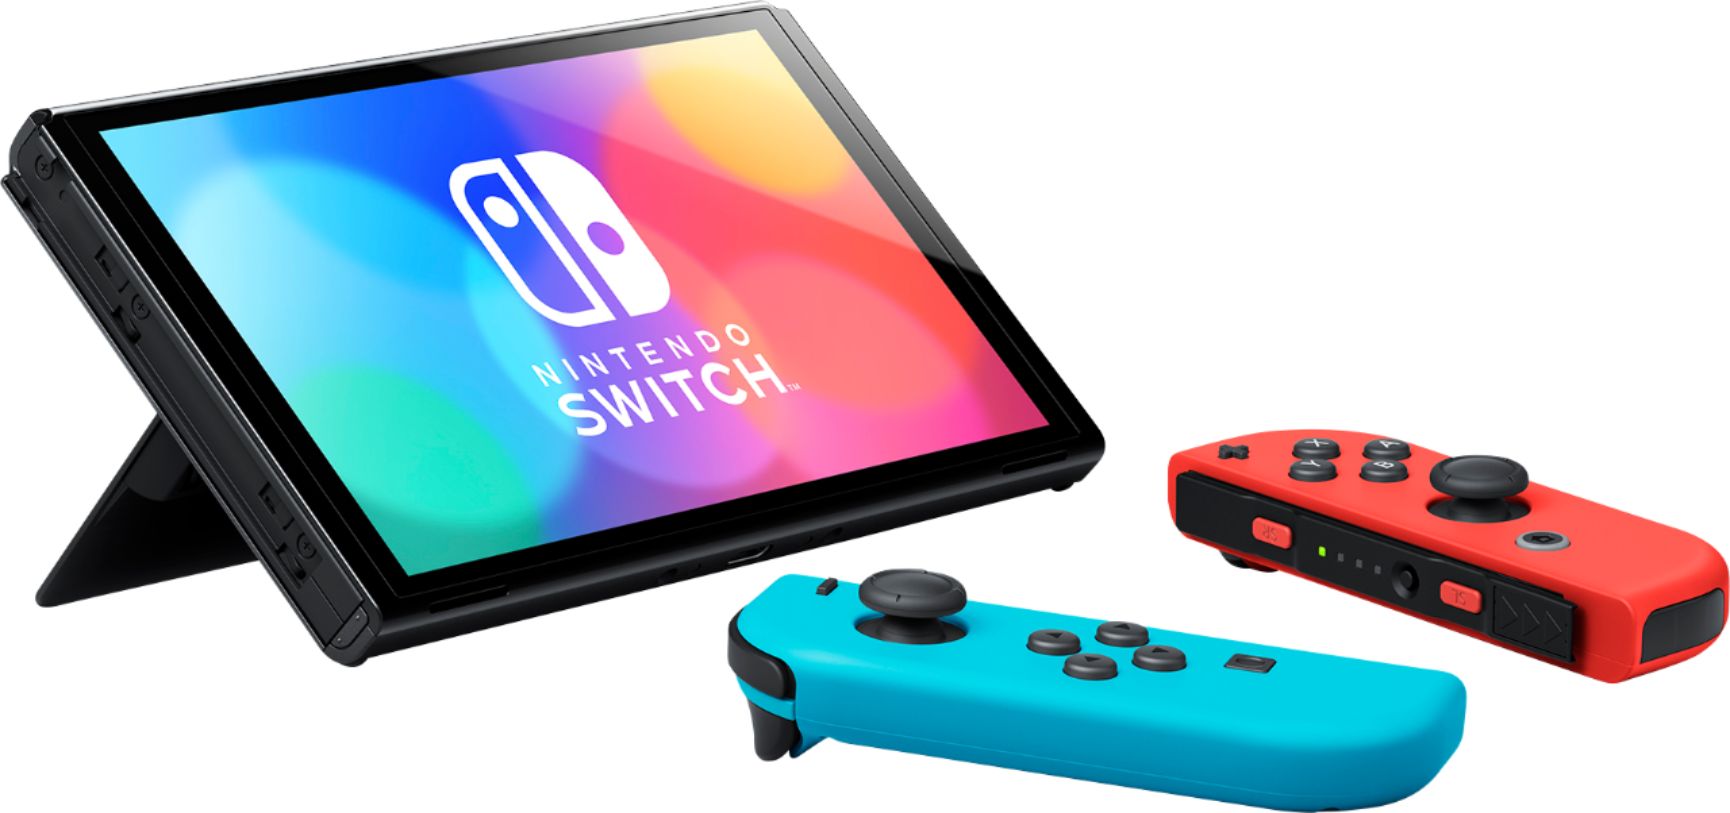 2022 New Nintendo Switch OLED Model Neon Red Blue with Metroid Dread and Mytrix Full Body Skin Sticker for NS OLED Console, Dock and Joycons - Sushi Set